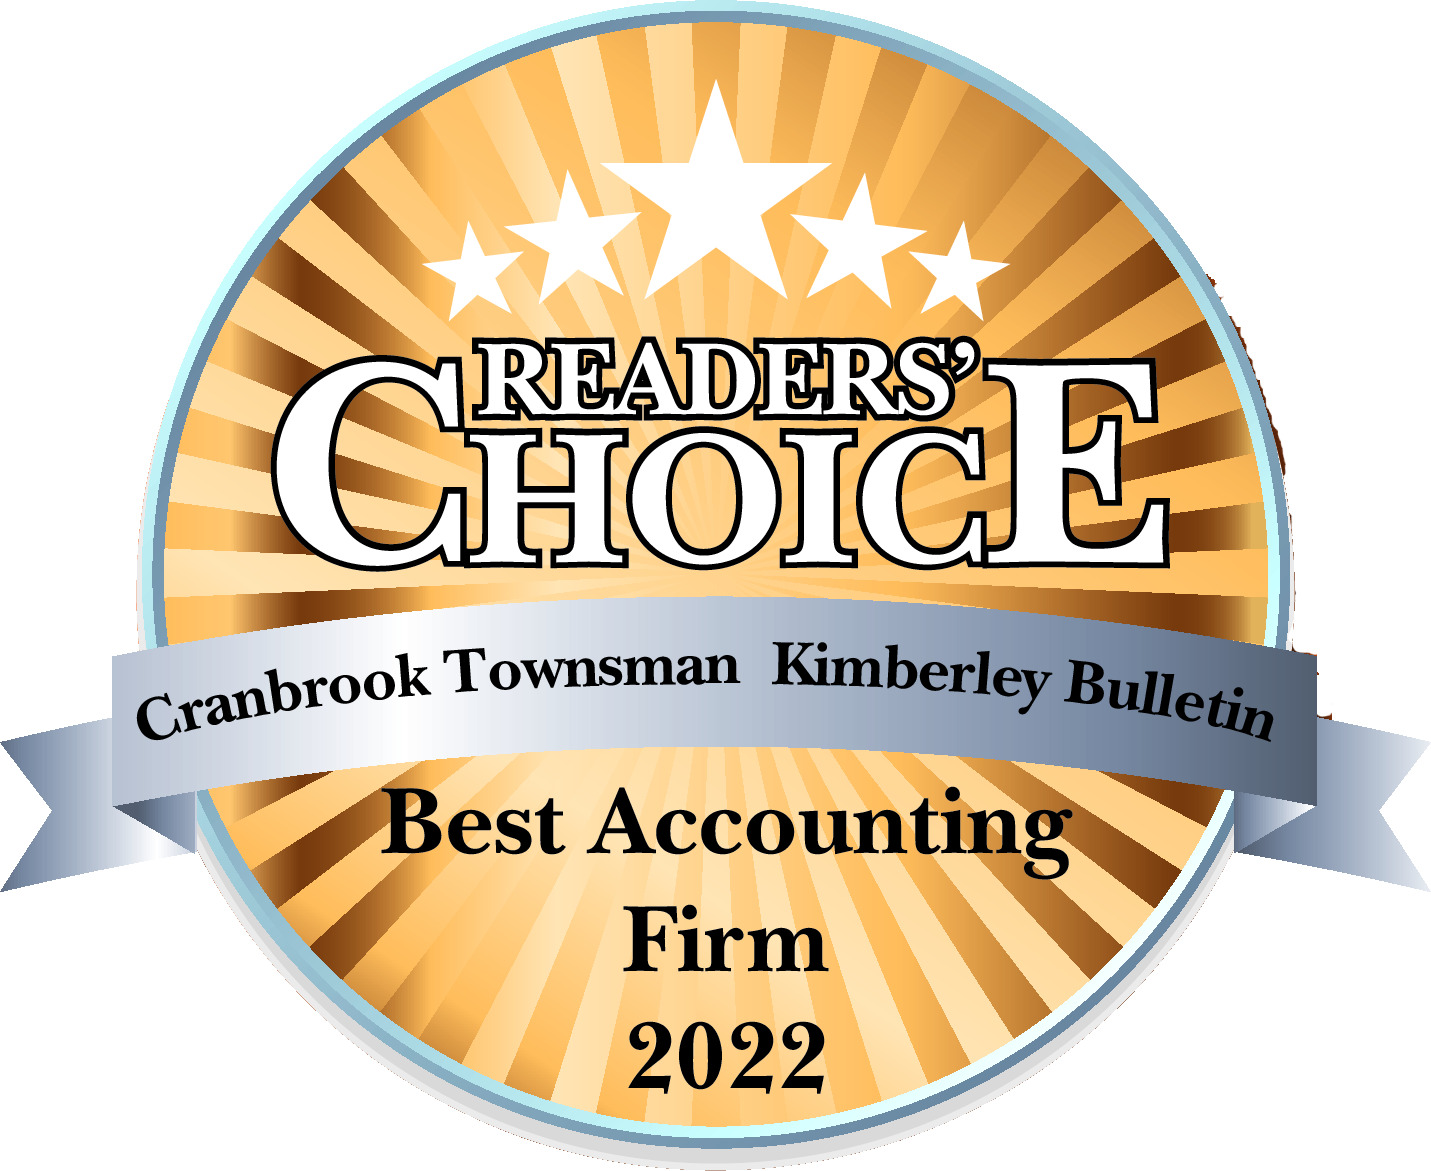 Best Accounting Firm 2022